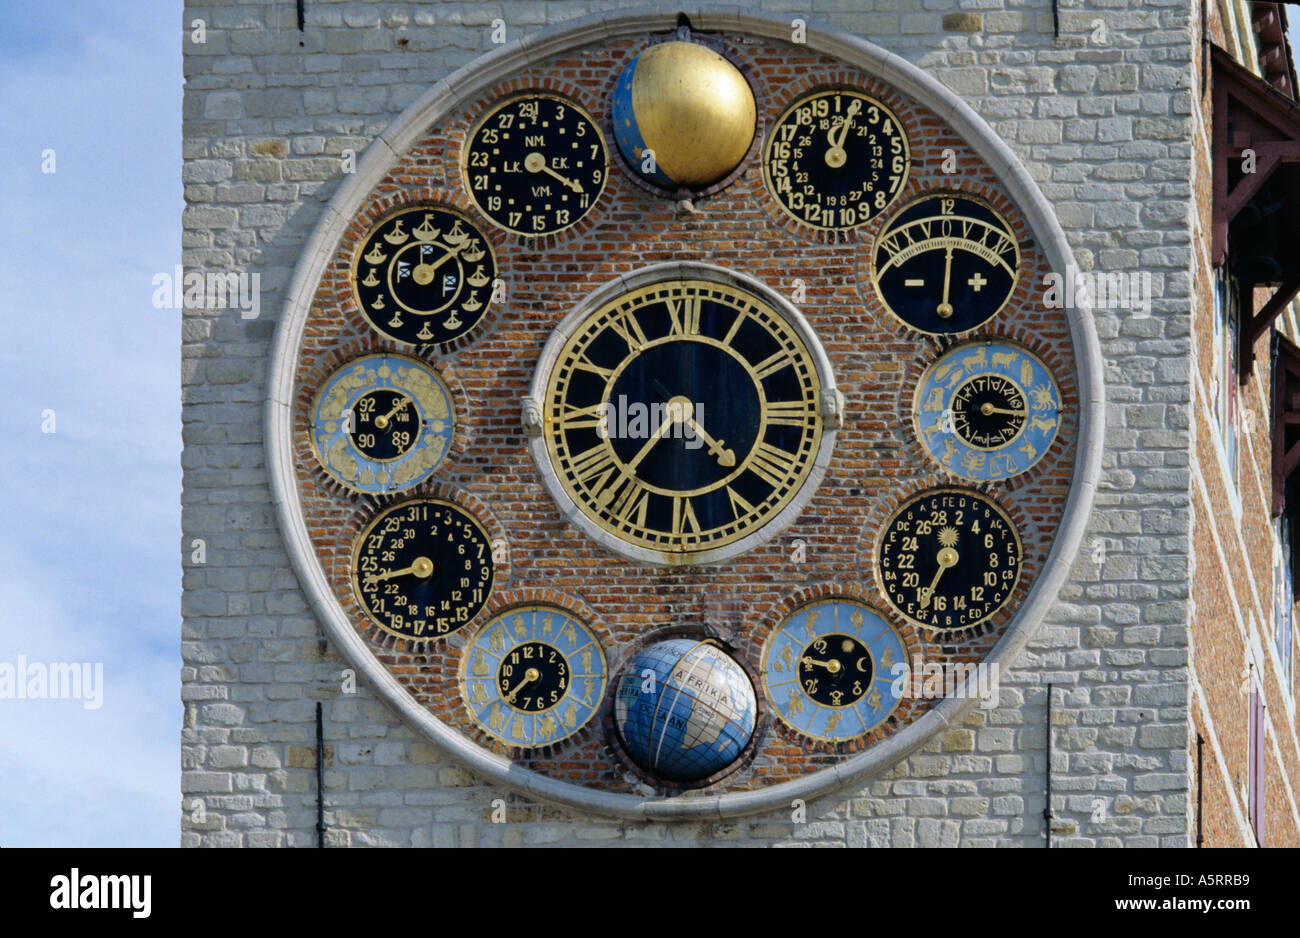 clock with astronomic scales on tower Zimmerturm in Lier Belgium Stock Photo